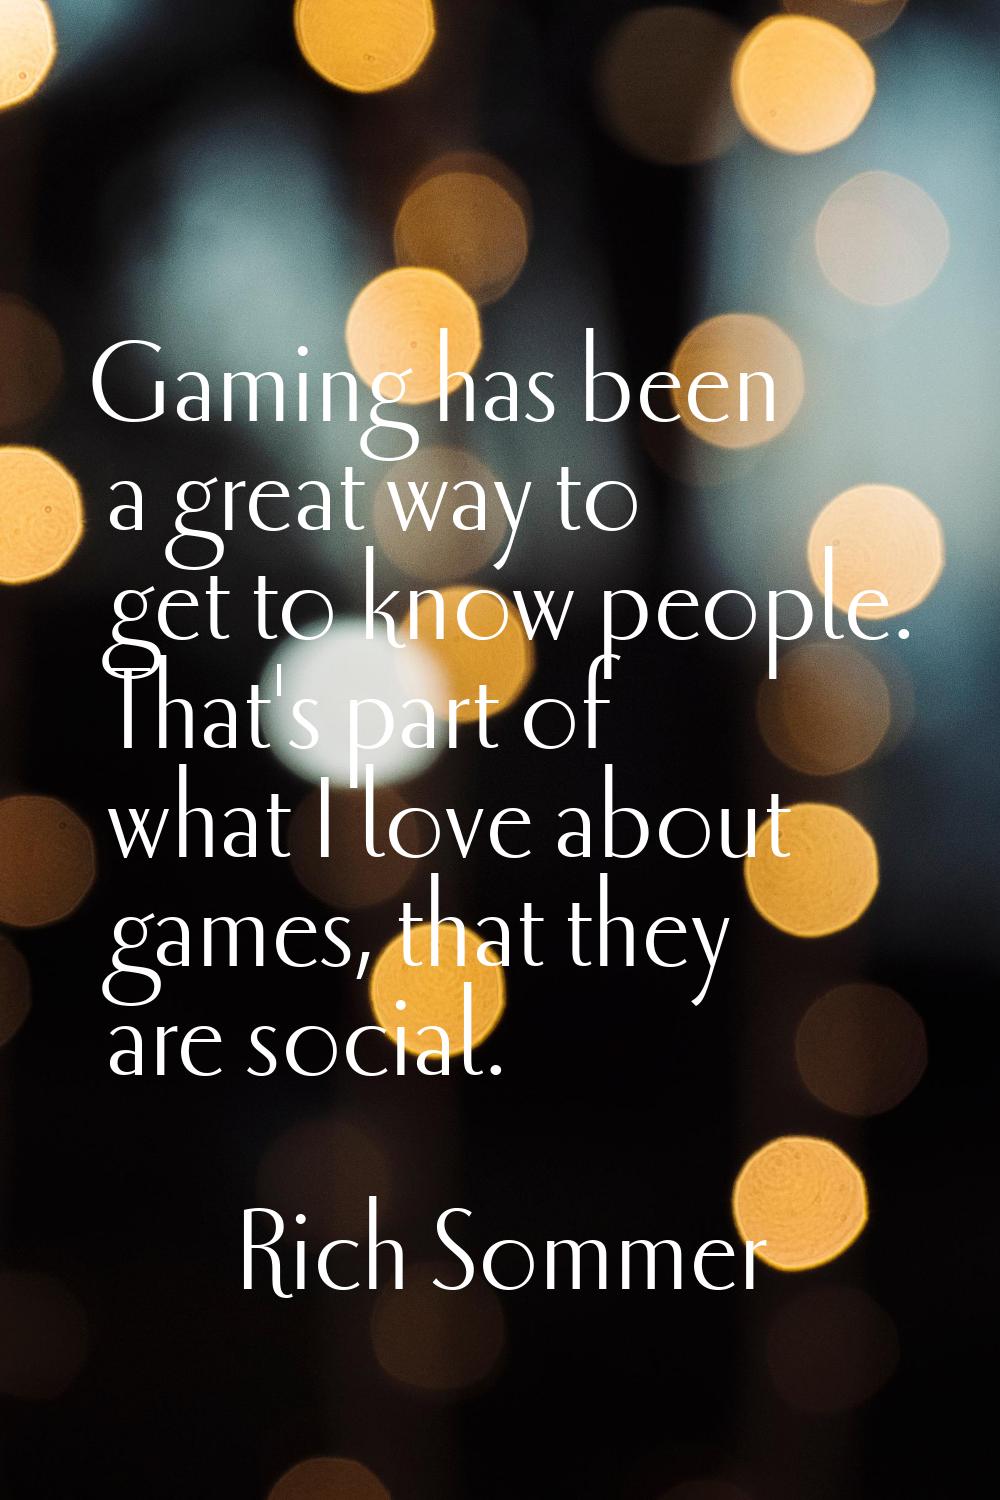 Gaming has been a great way to get to know people. That's part of what I love about games, that the